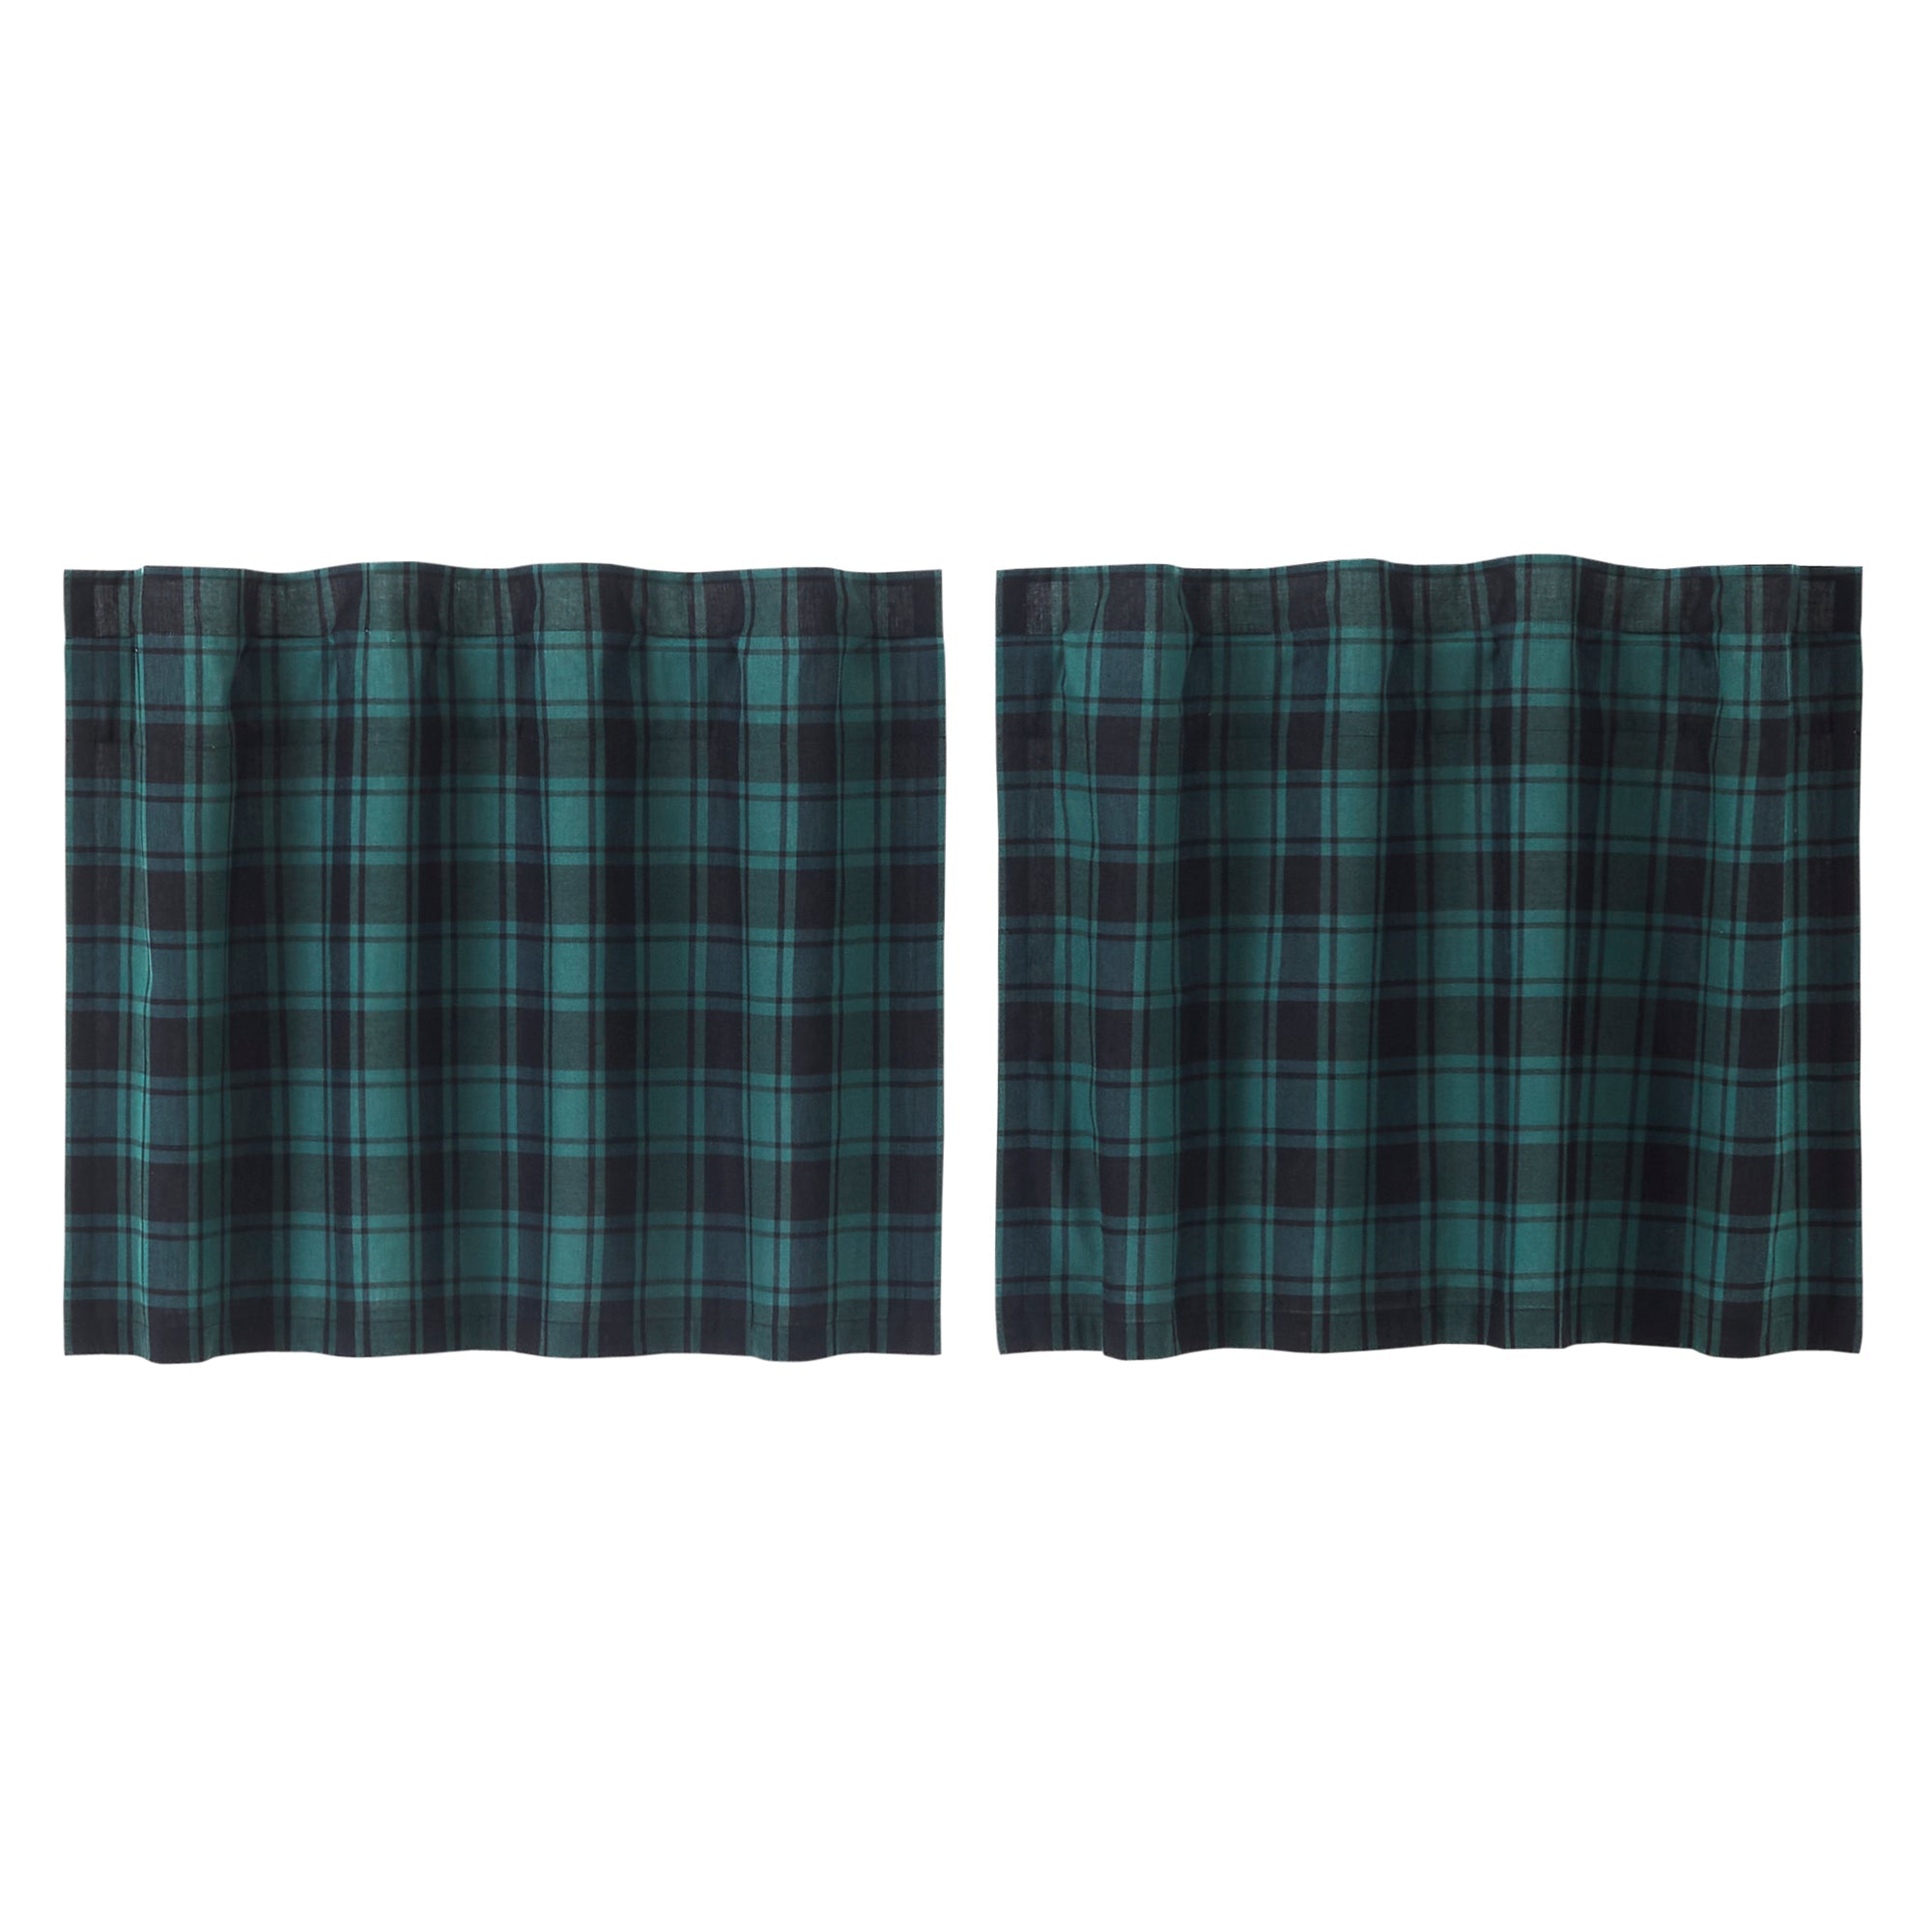 Pine Grove Tier Curtain Set of 2 L24xW36 VHC Brands